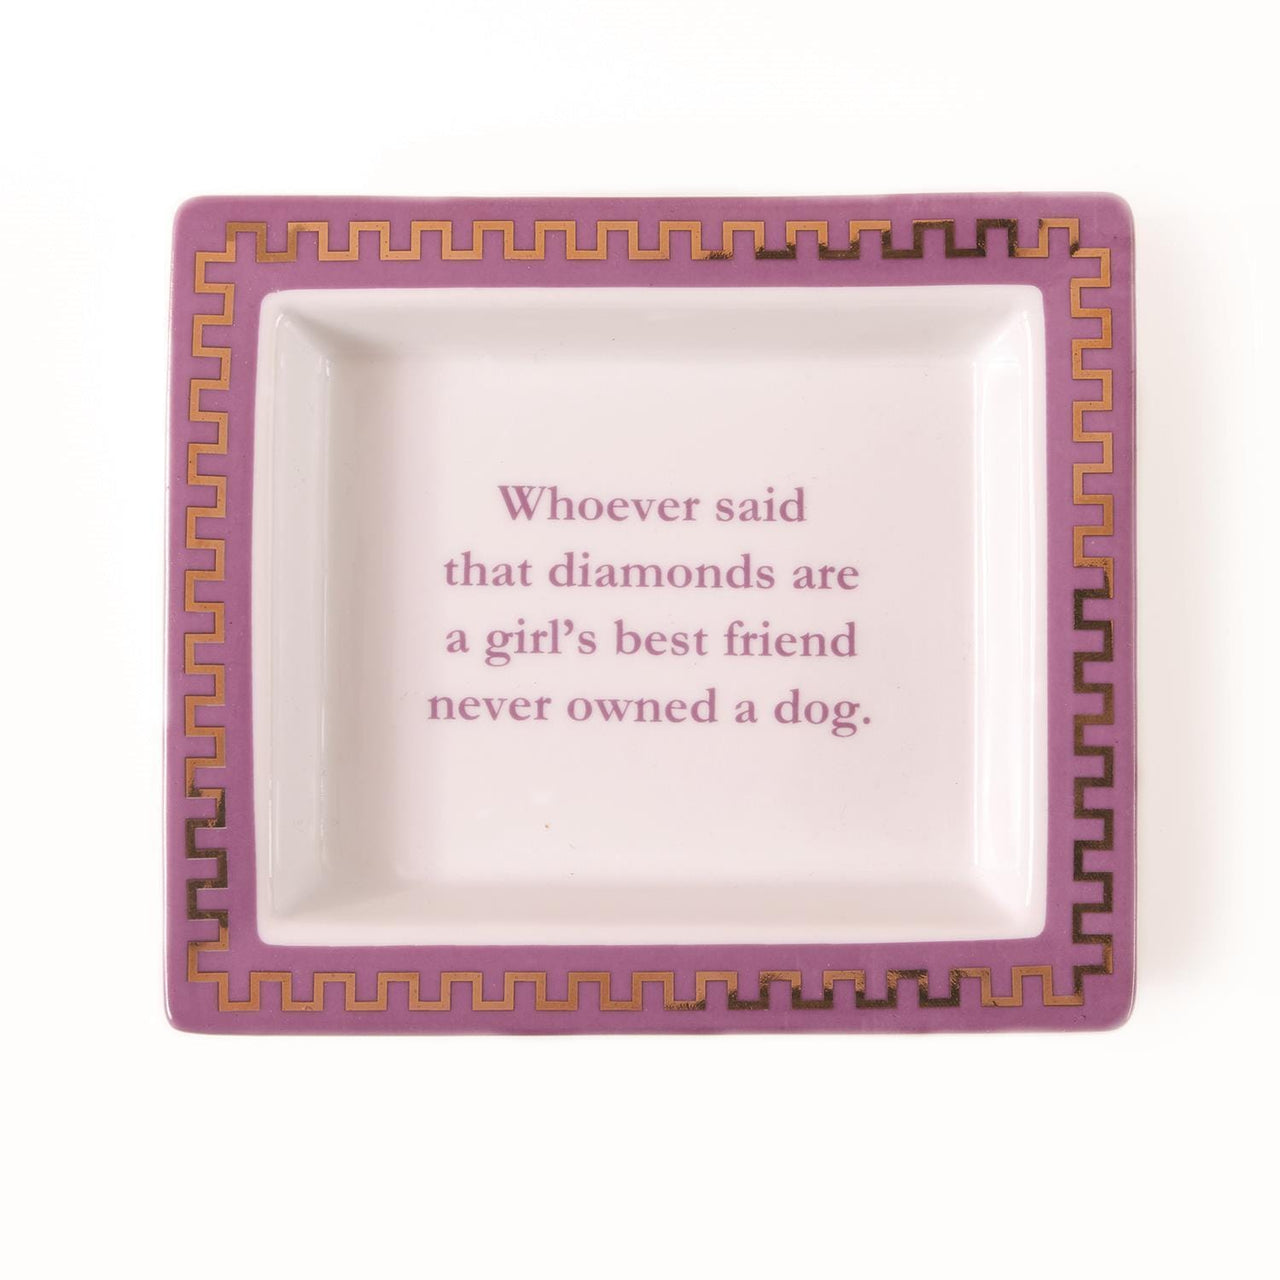 Wise Sayings Porcelain Tray - Girl's Best Friend Two's Company trinket tray